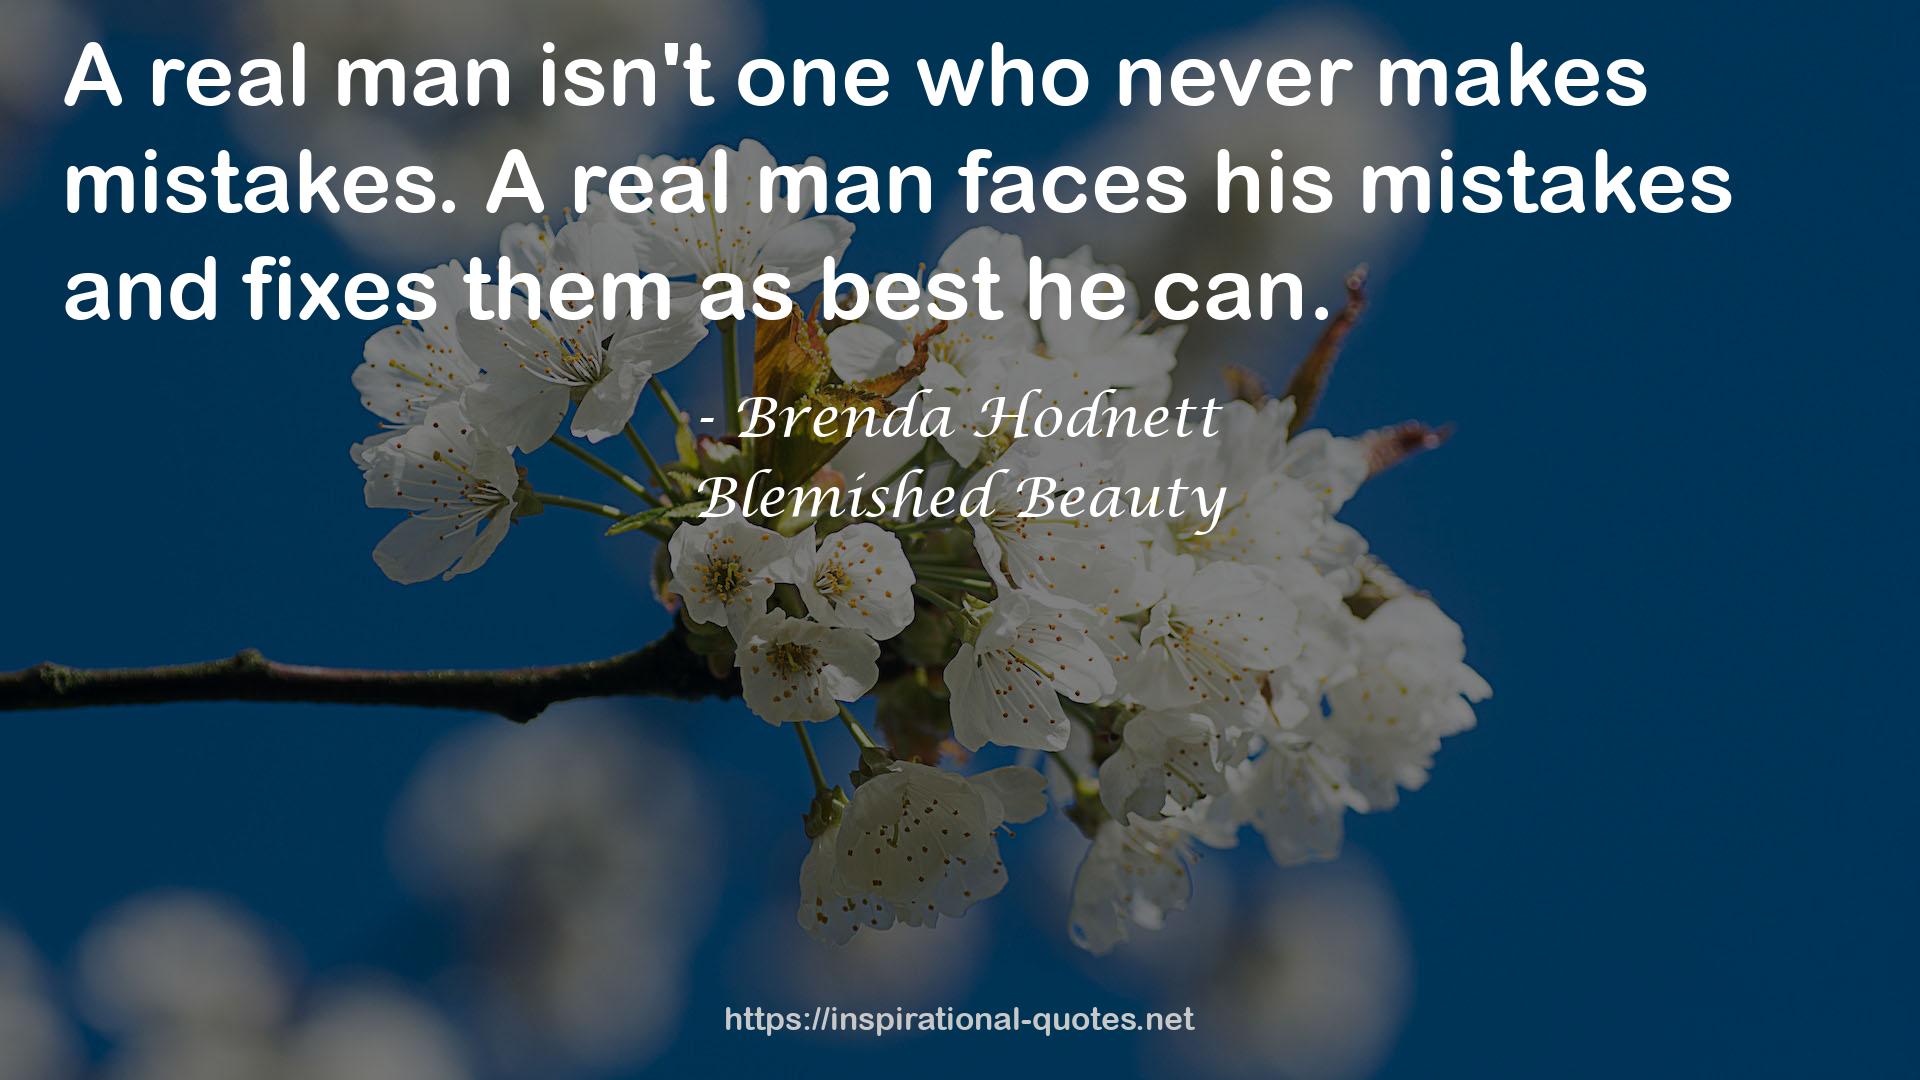 Blemished Beauty QUOTES